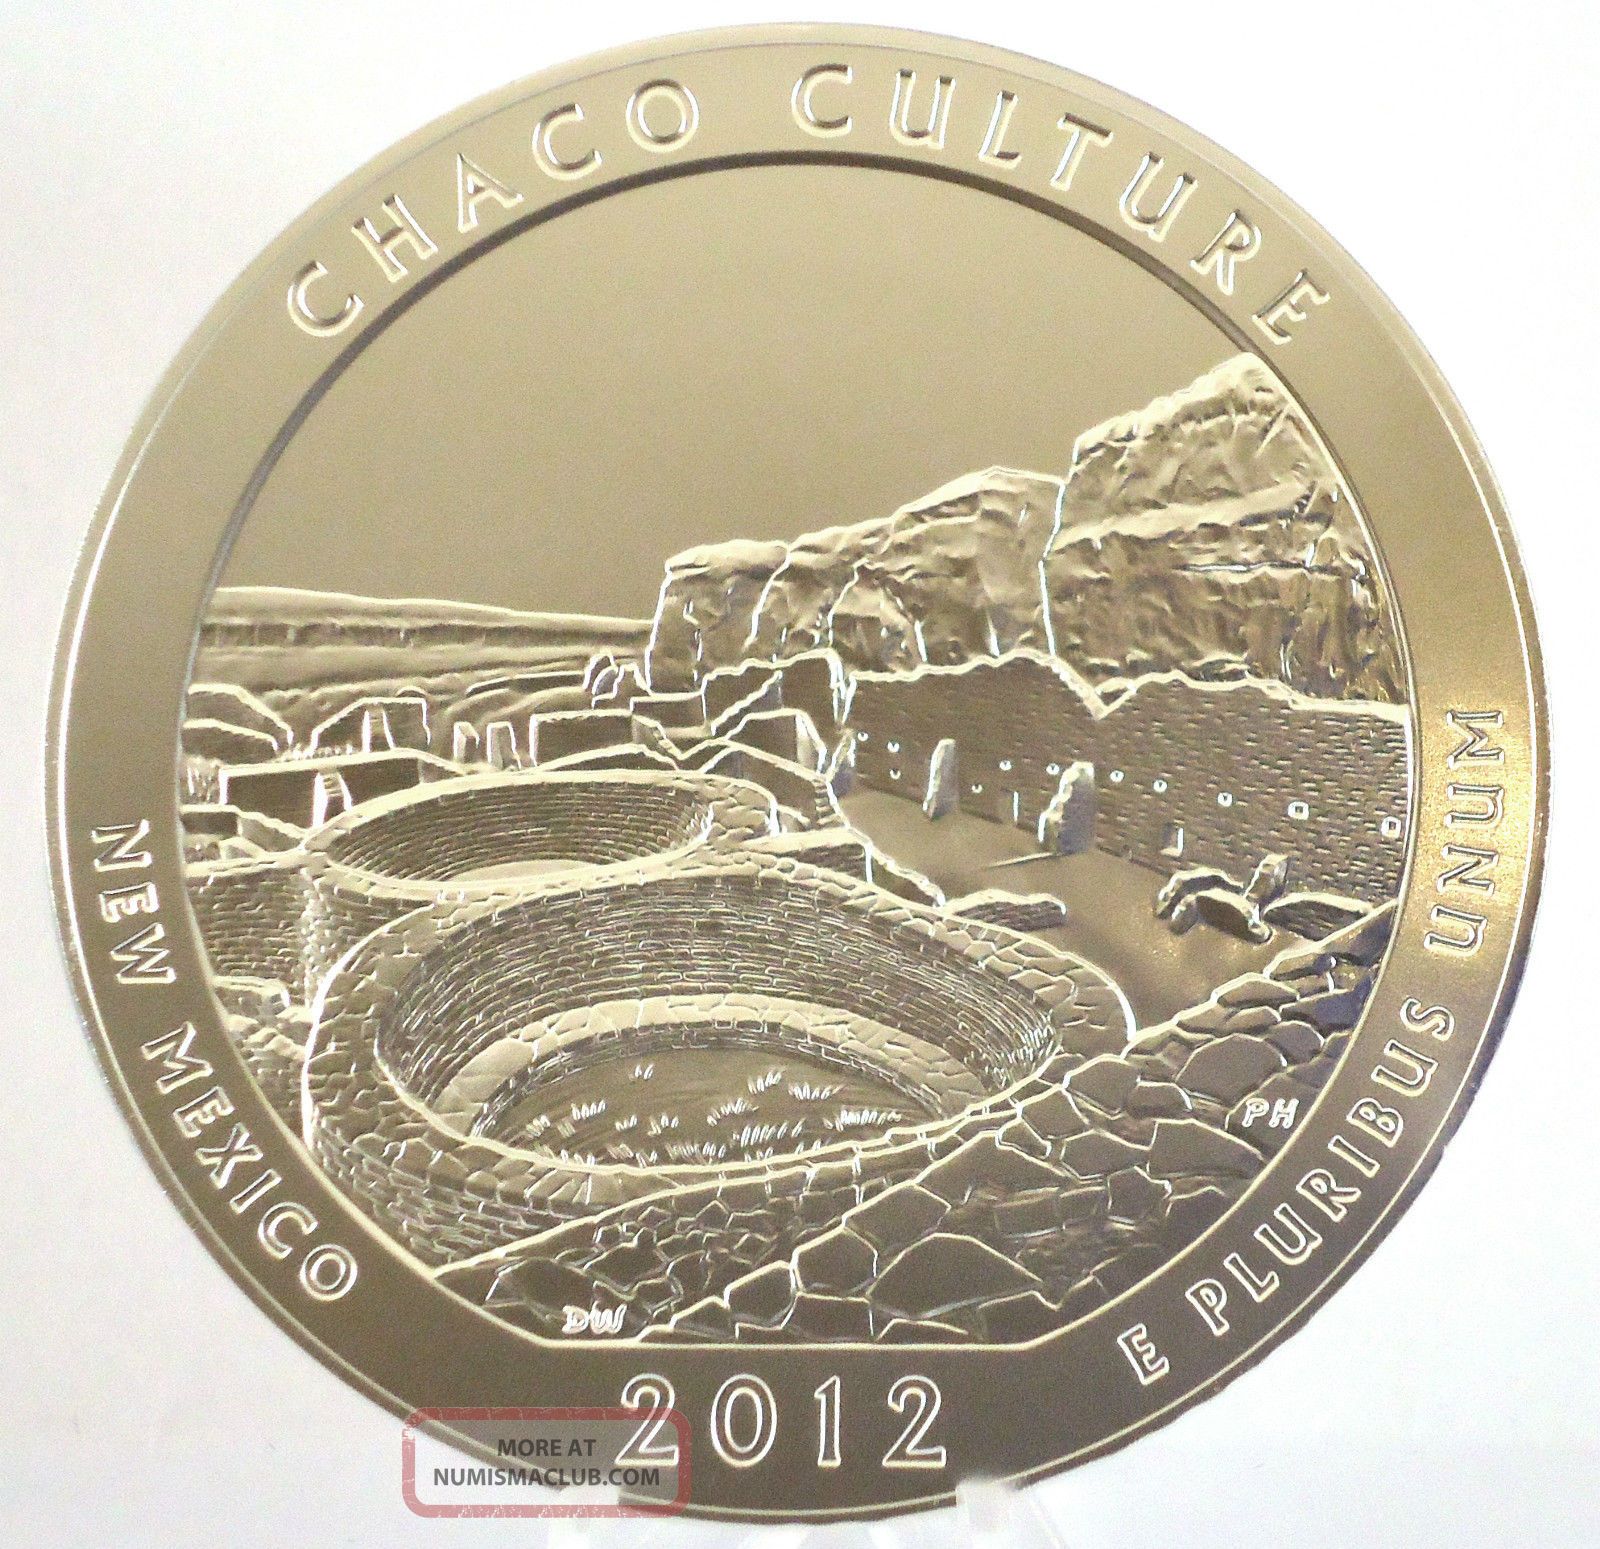 2012 - P Chaco Culture National Historical Park 5 Oz. Silver America The